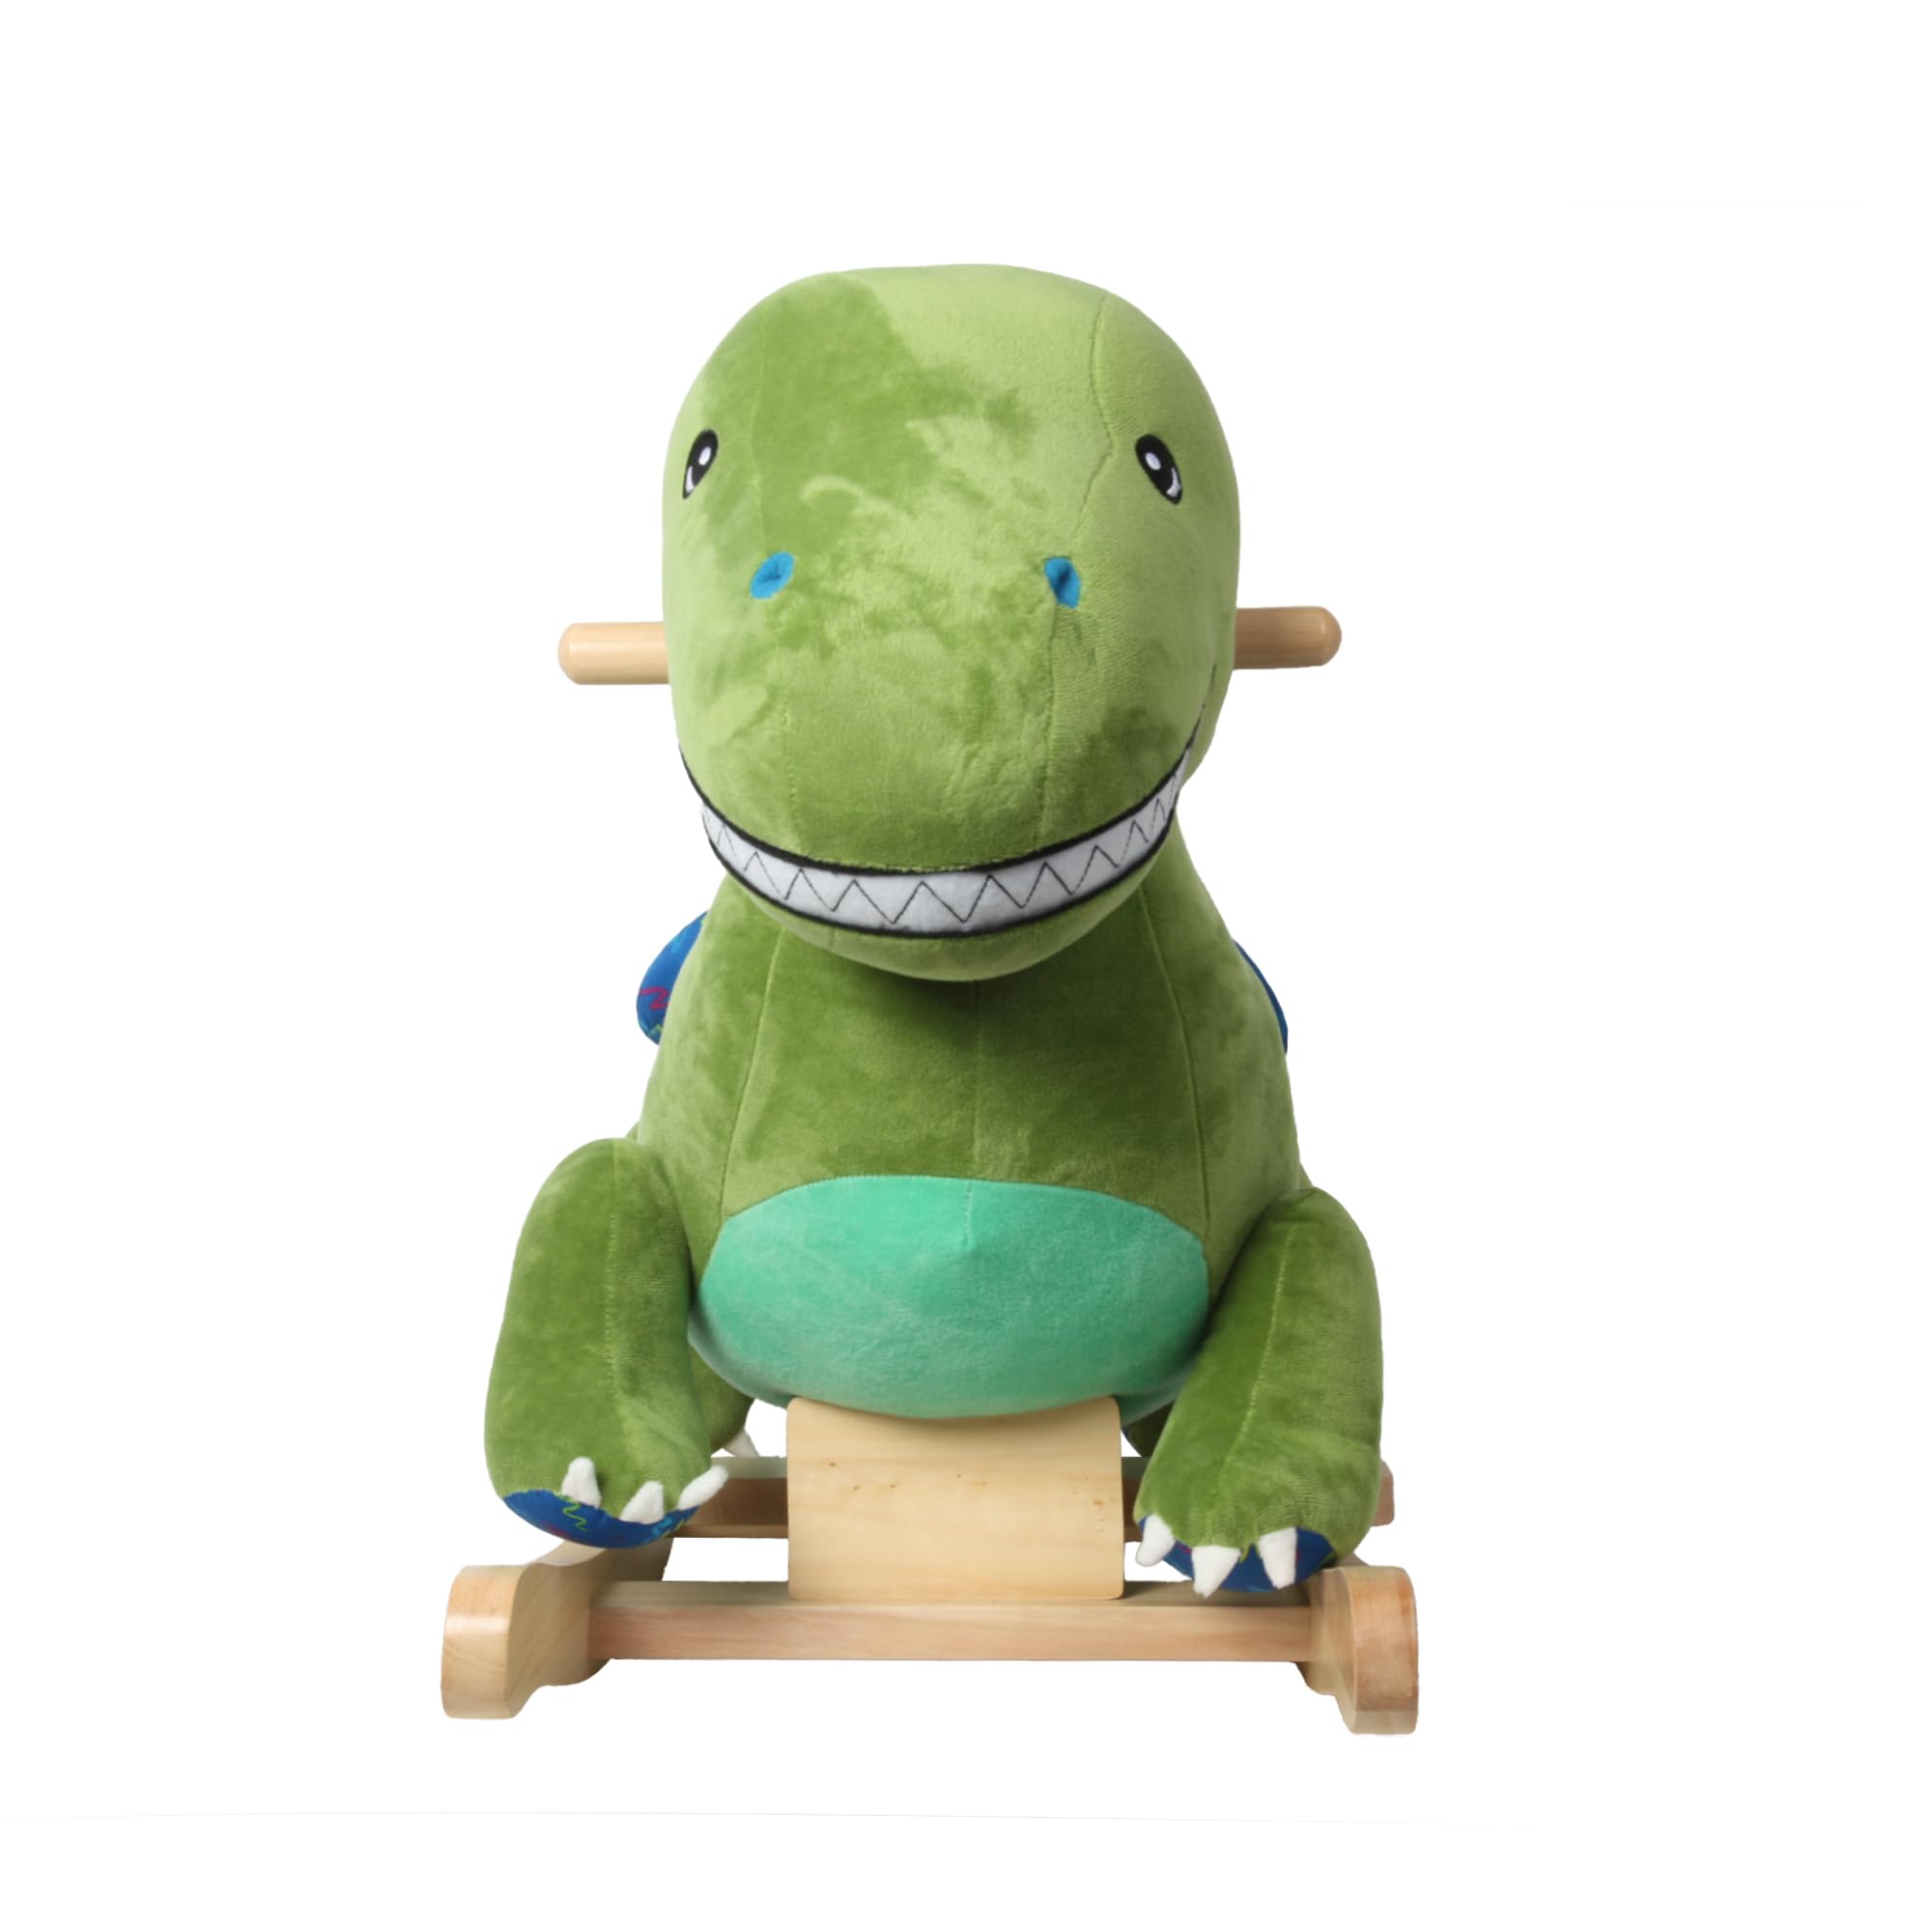 Linzy Toys Green Dinosaur Baby Rocker, Kids Ride on Toy for Toddlers Age 1+, Infant (Boy/Girl) Plush Animal Rocker, Green,(37629), 23.6 x 13.7 x 19.6 inches